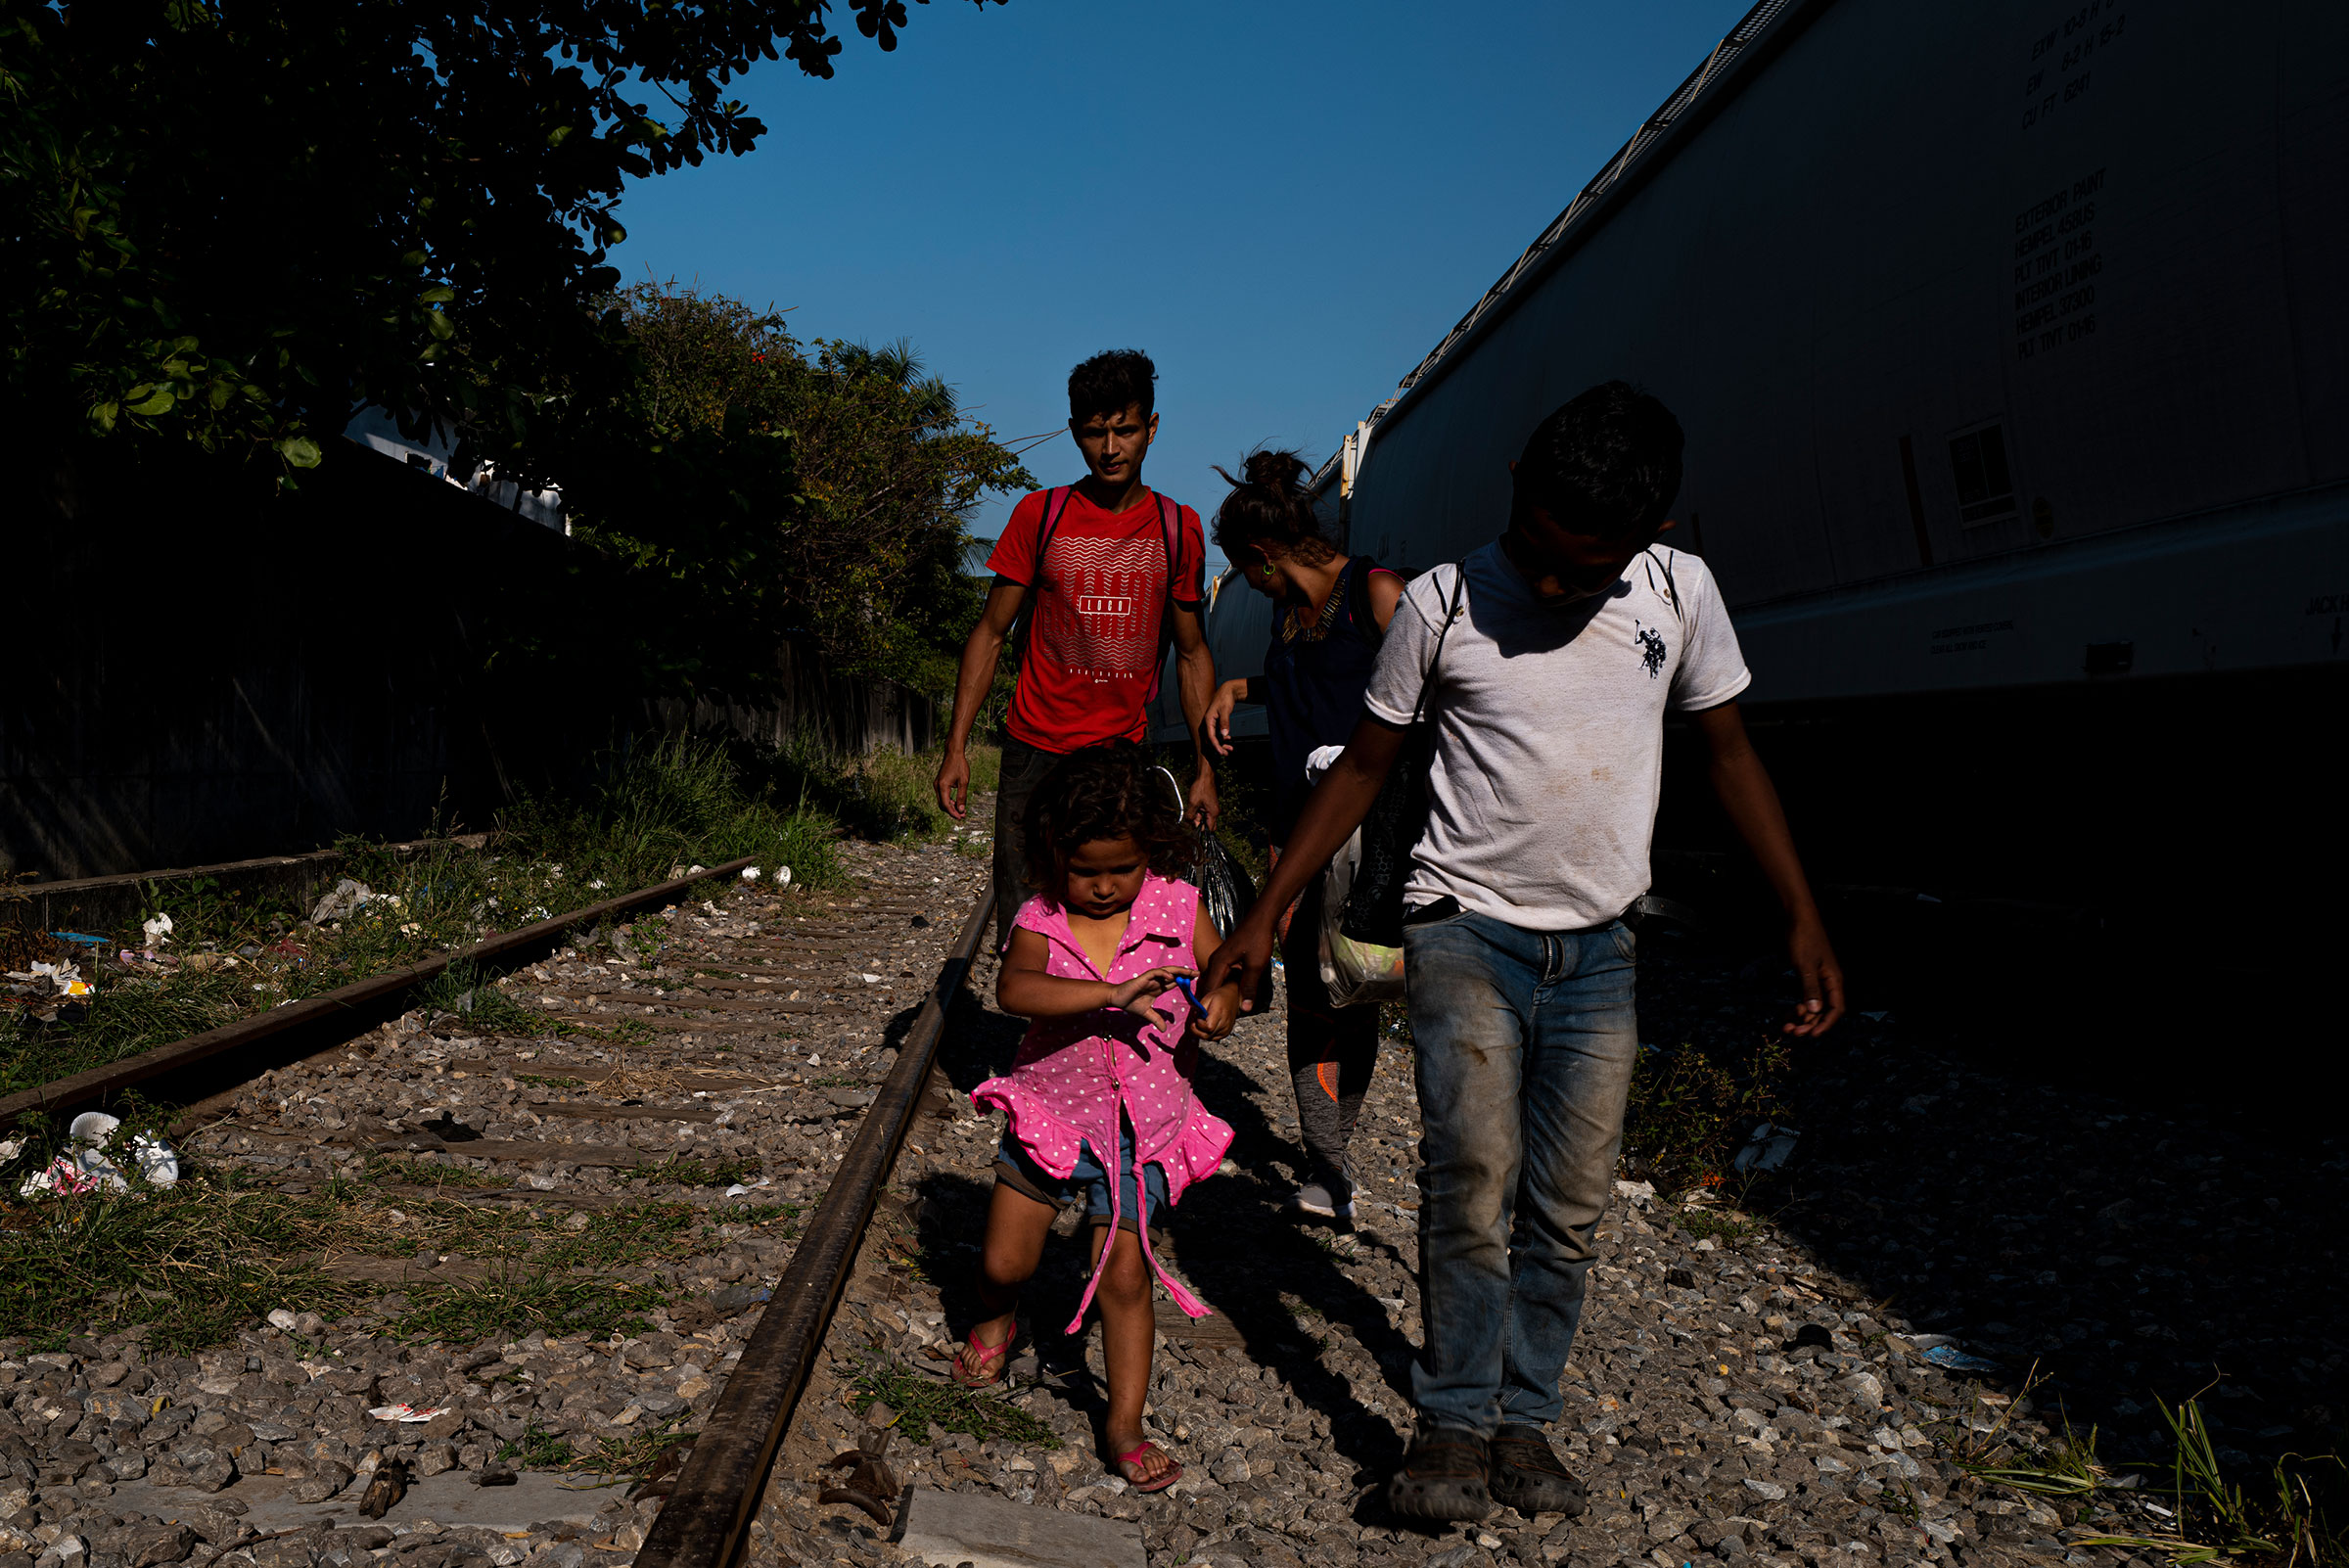 Members of the Ramirez family walk along train tracks in Coatzacoalcos in the Mexican state of Veracruz on March 23, 2021. They fled their home in Santa Barbara, Honduras after their lives were threatened by gang members. Erica Ramirez is nine months pregnant. (Yael Martínez—Magnum Photos for TIME)